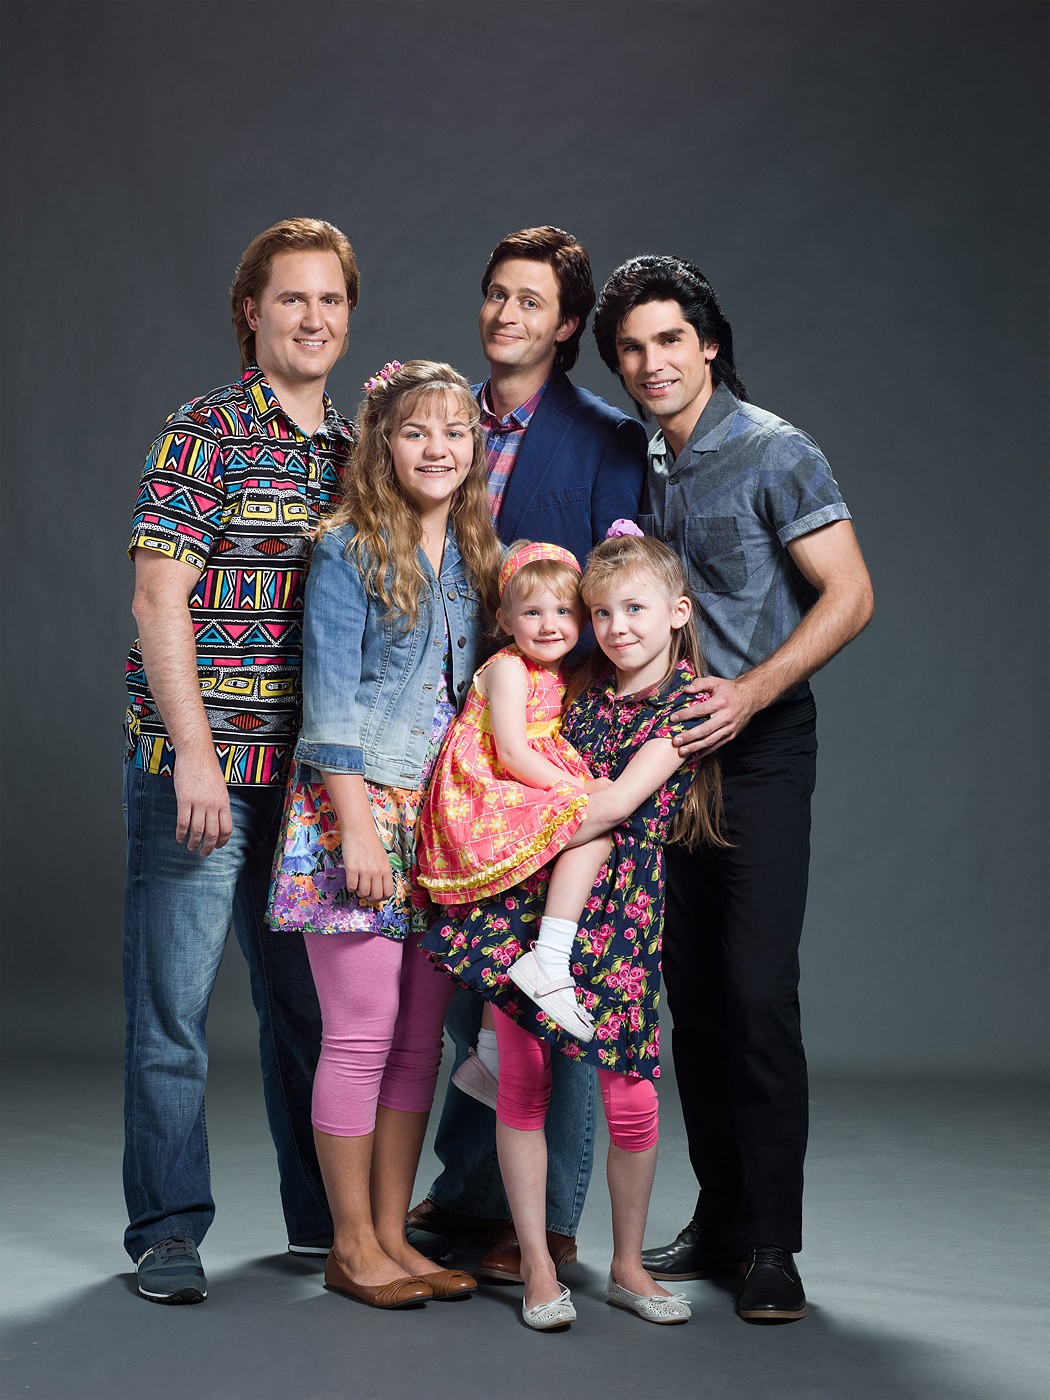 Justin Mader, Garrett Brawith, Justin Gaston, Shelby Armstrong, Kinslea Todd and Dakota Guppy in Lifetime's The Unauthorized Full House Story (2015)